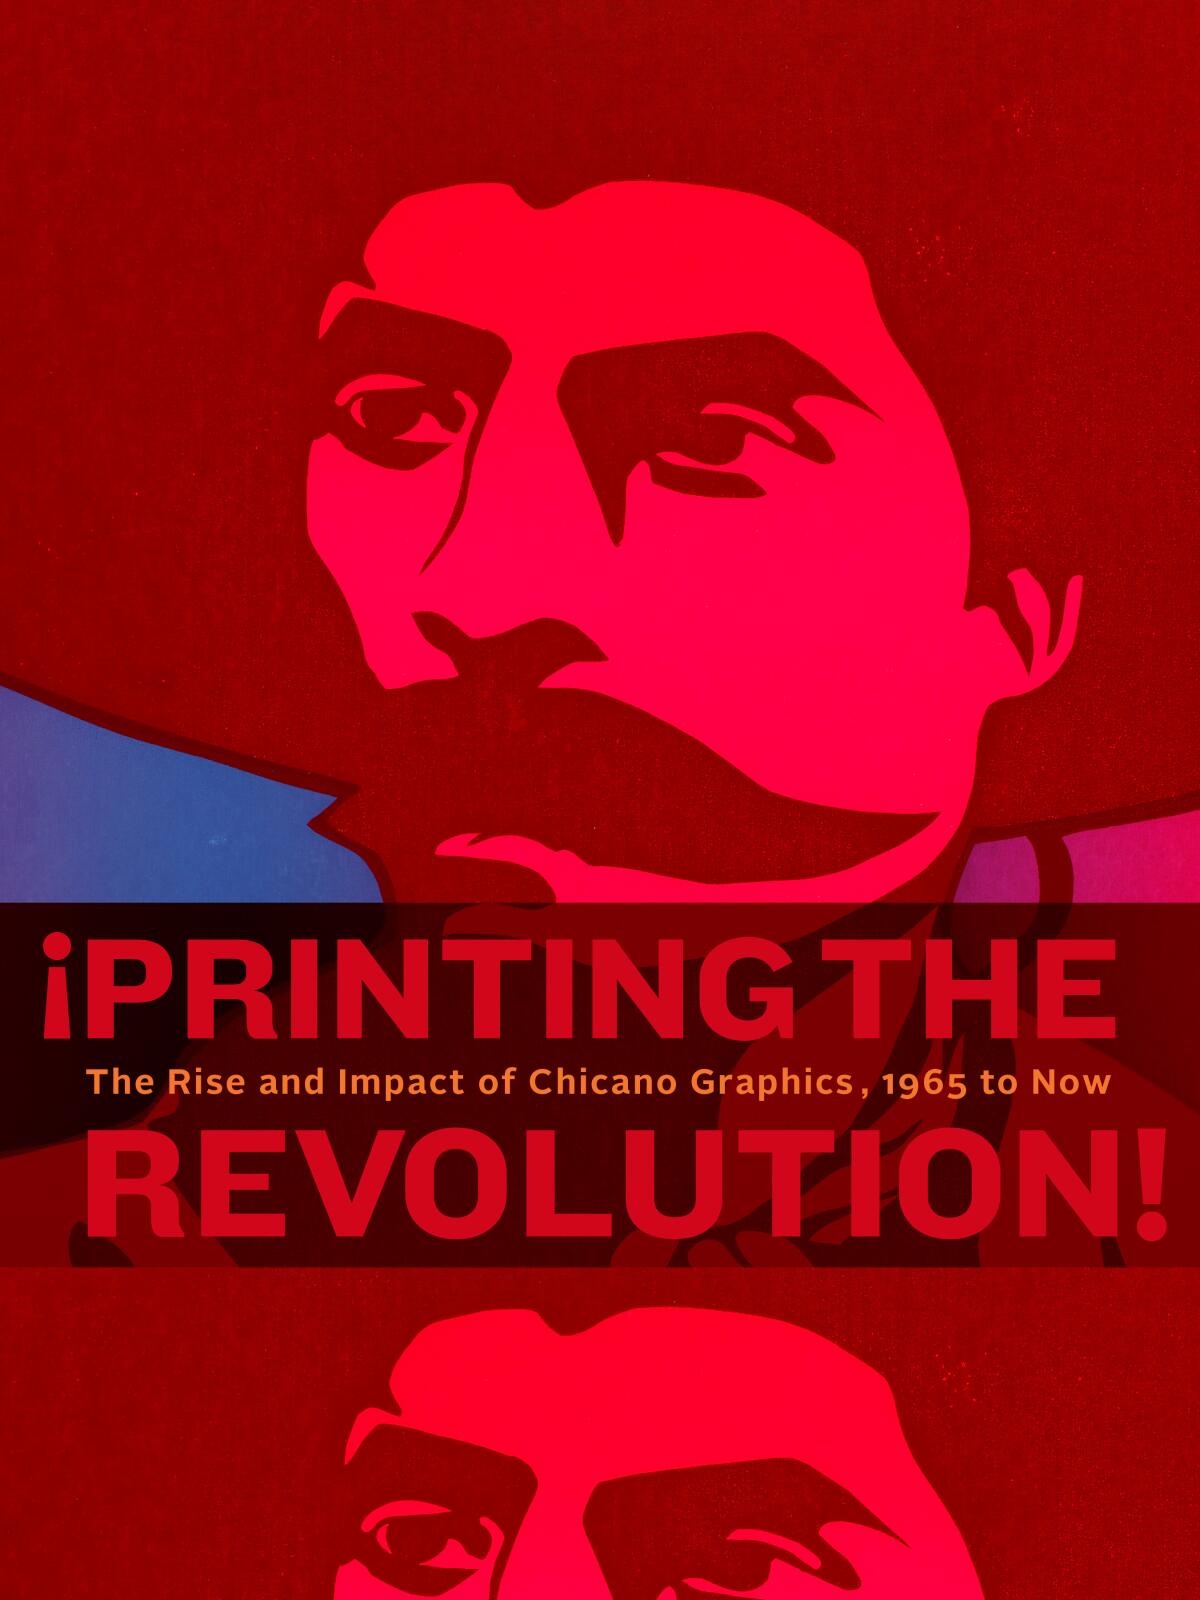 A graphic design in shades of red shows Mexican revolutionary Emiliano Zapata as backdrop to the book's title